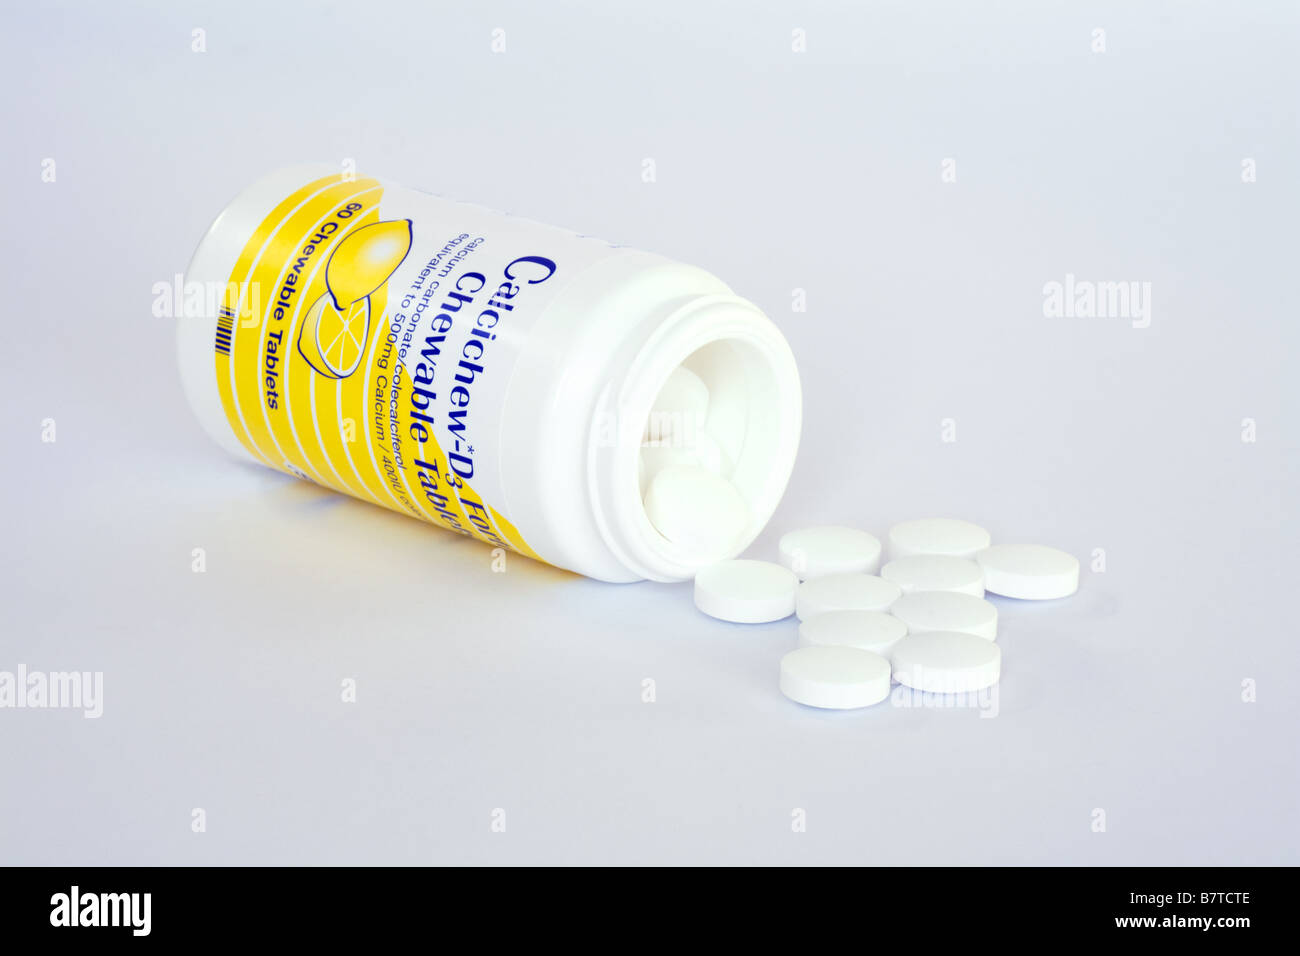 Calcium tablets used in the treatment of osteoporosis Stock Photo